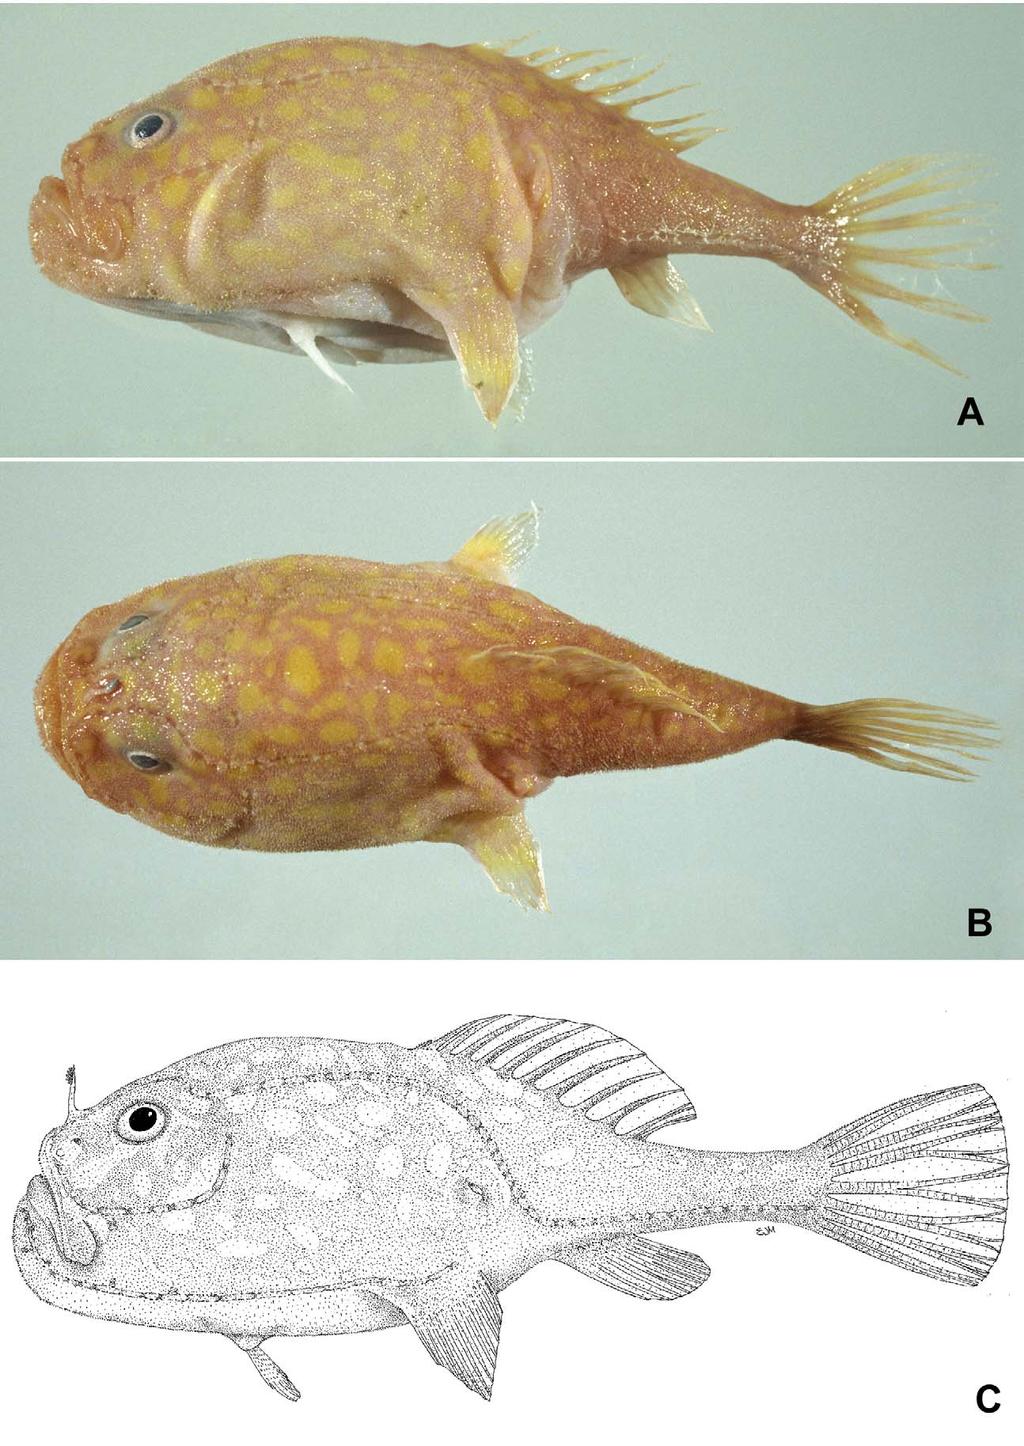 FIGURE 3. Chaunax flavomaculatus sp. nov., NMNZ P.032620, holotype, 105 mm SL. A. Lateral view. B. Dorsal view.